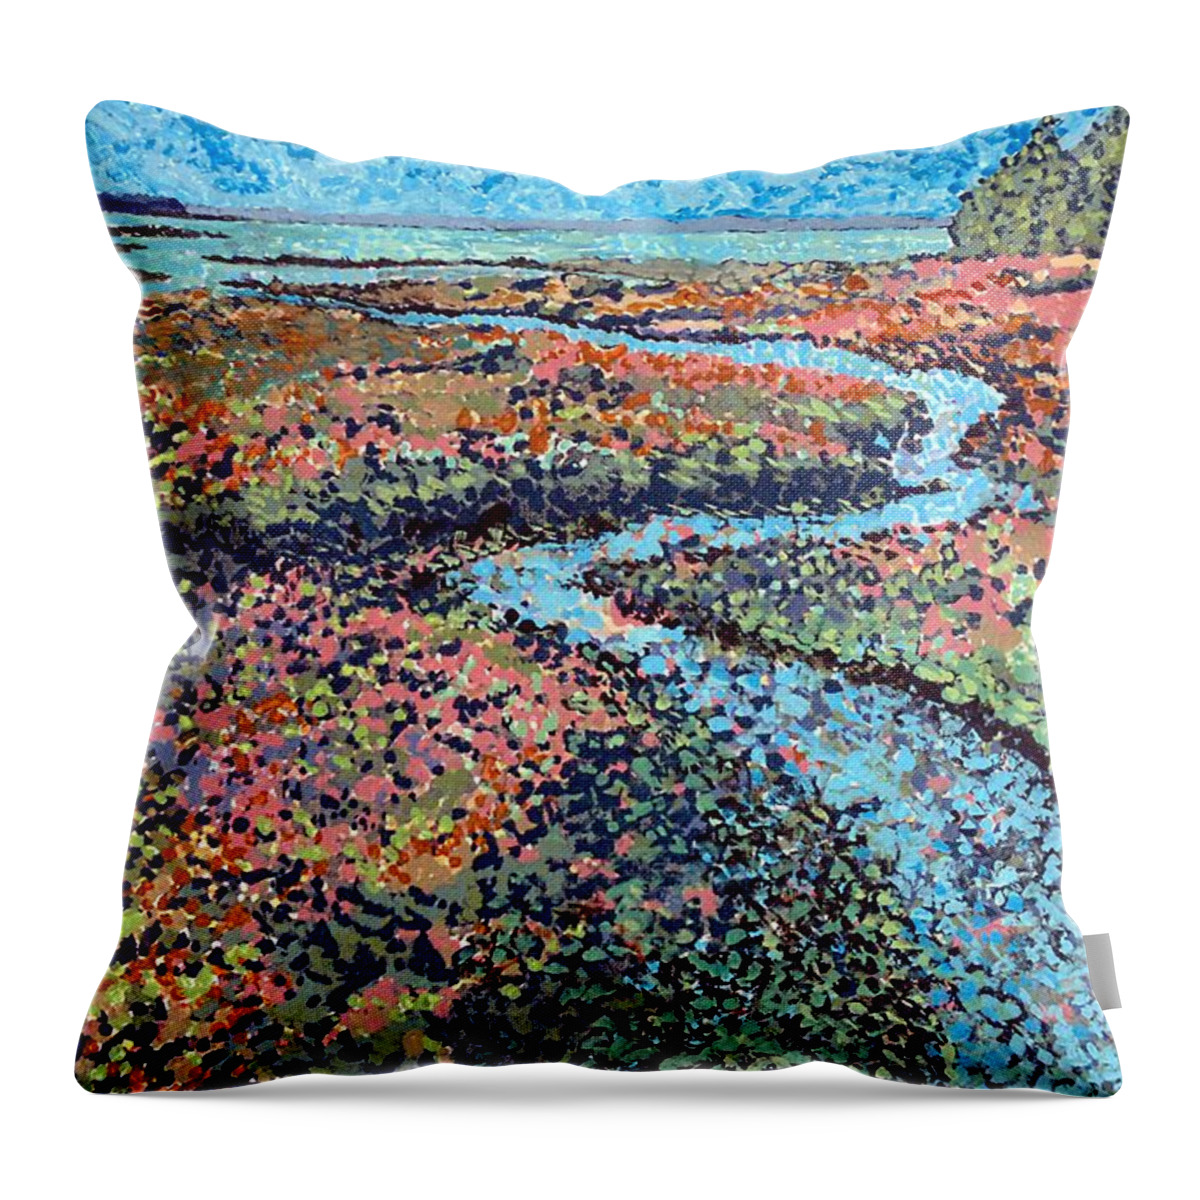 Sea Throw Pillow featuring the painting Pottery Creek by Michael Graham